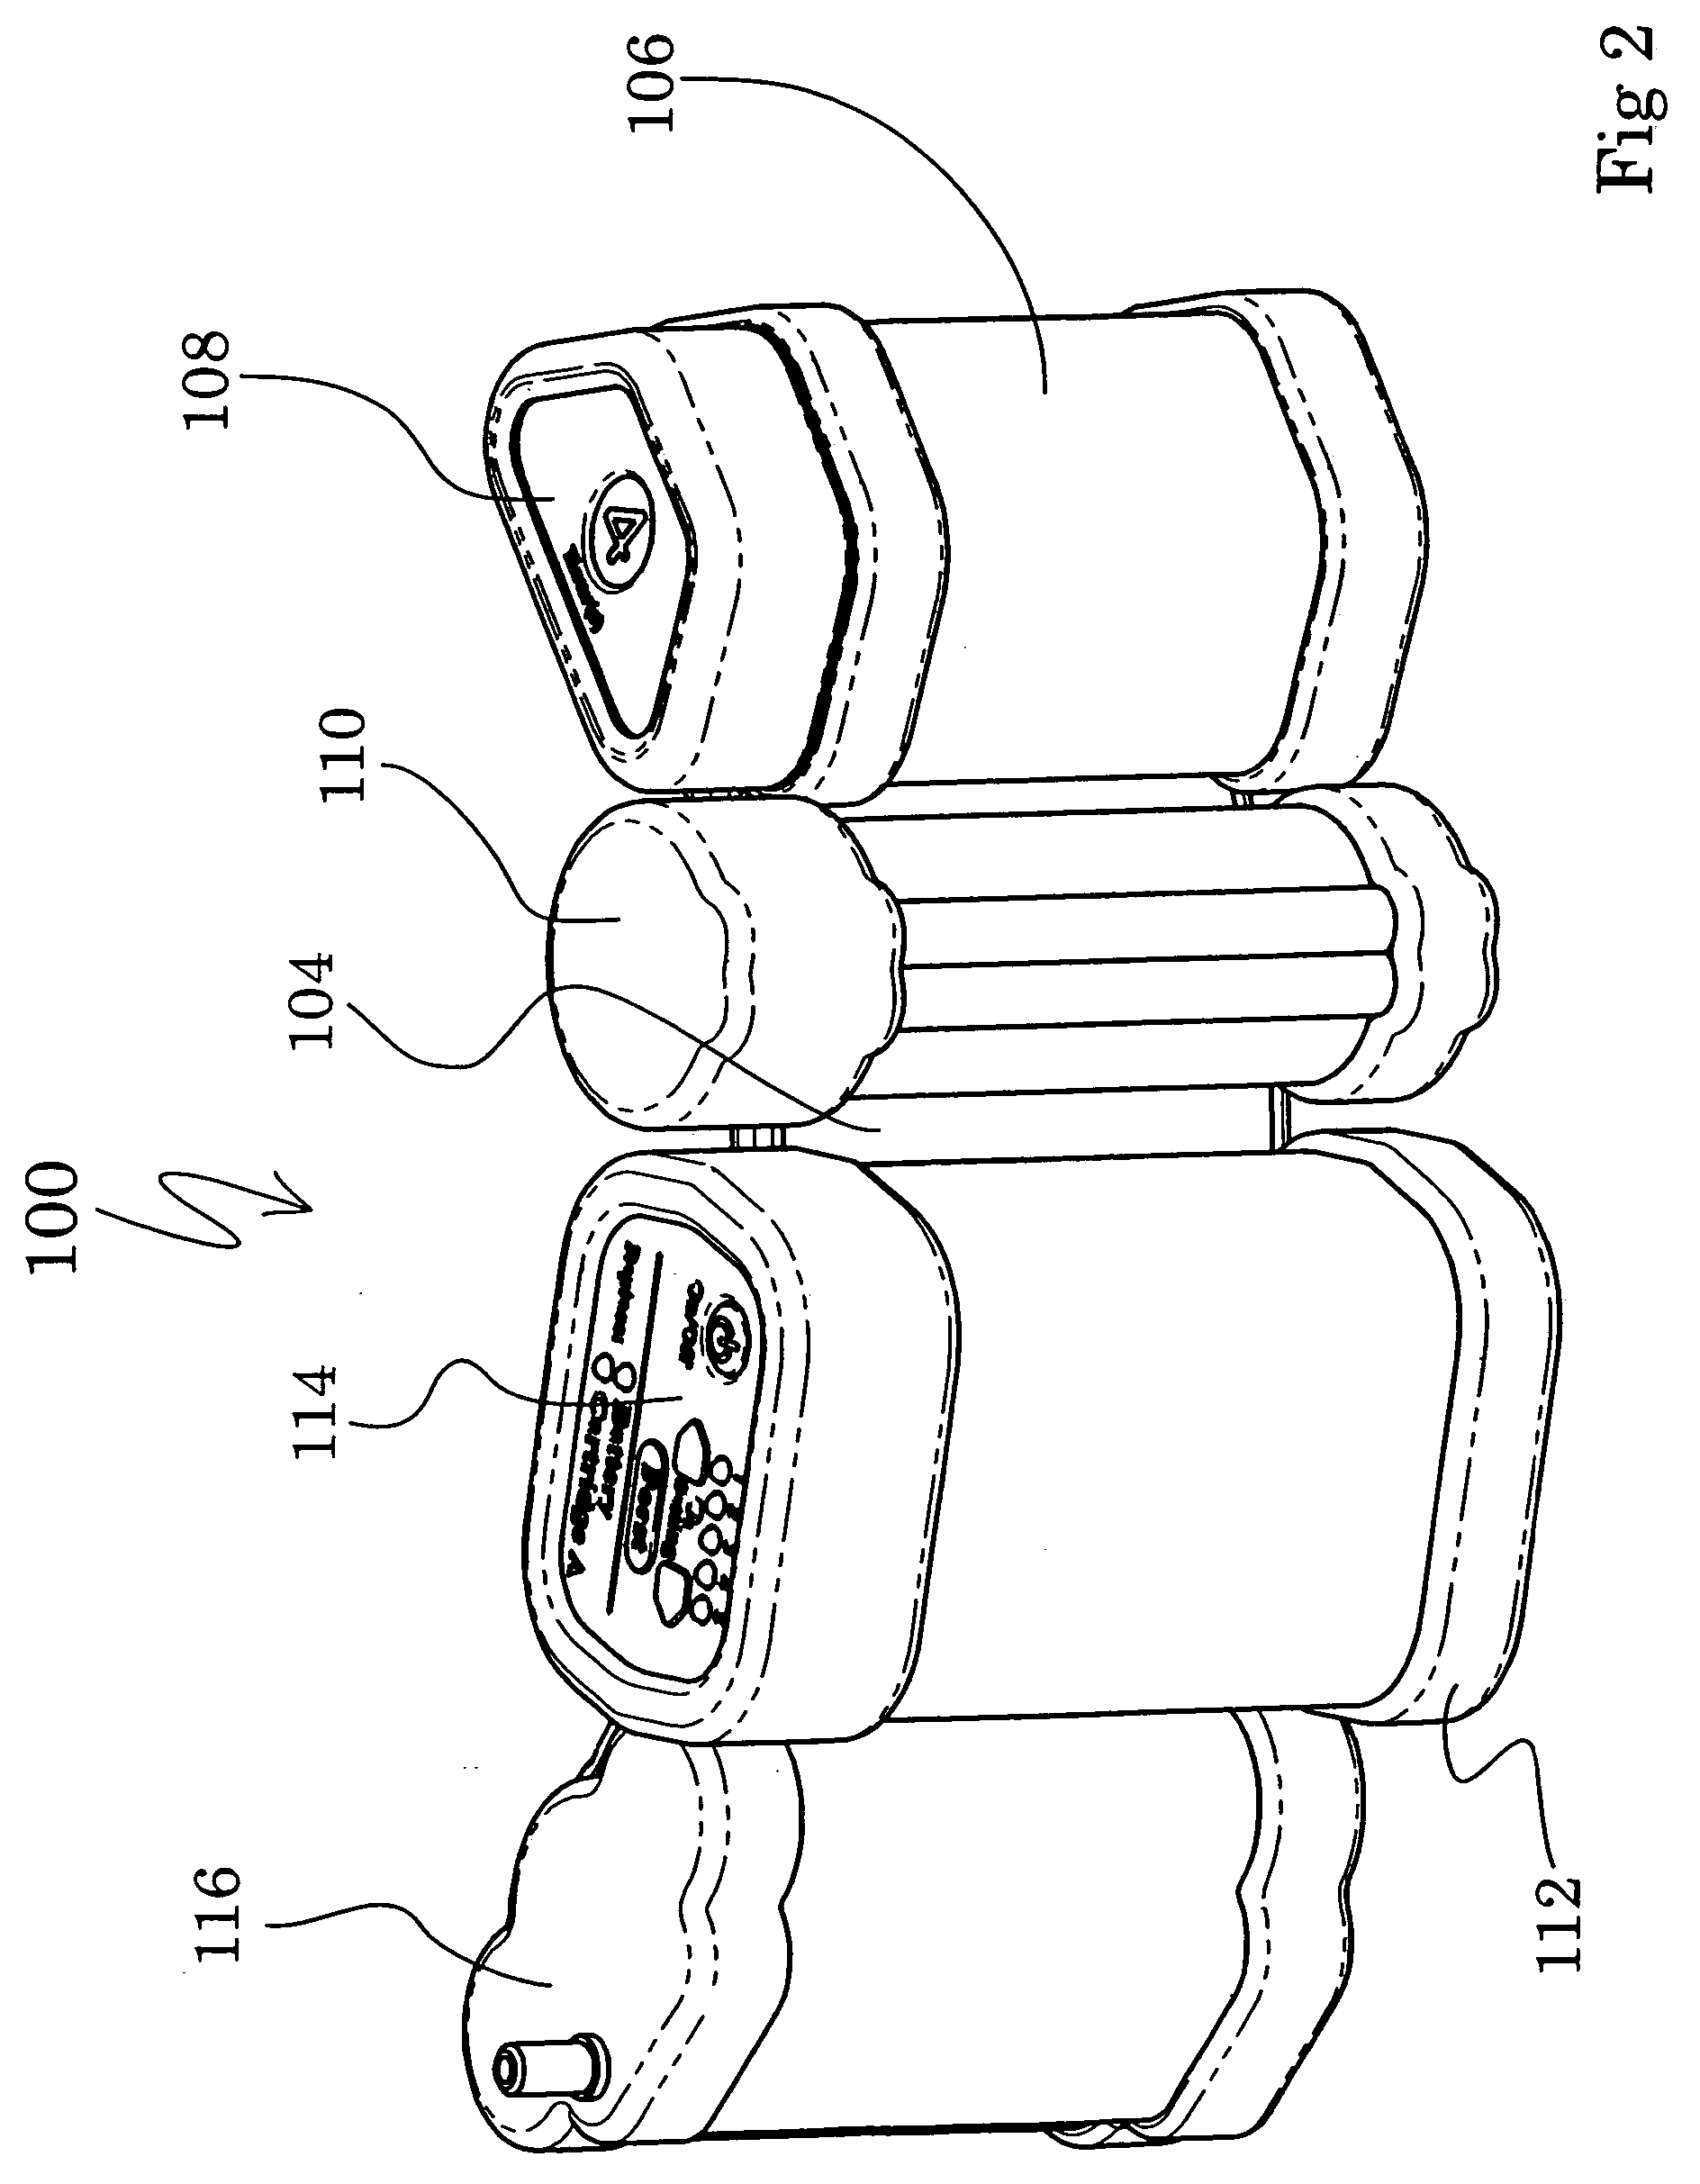 Product pump for an oxygen concentrator